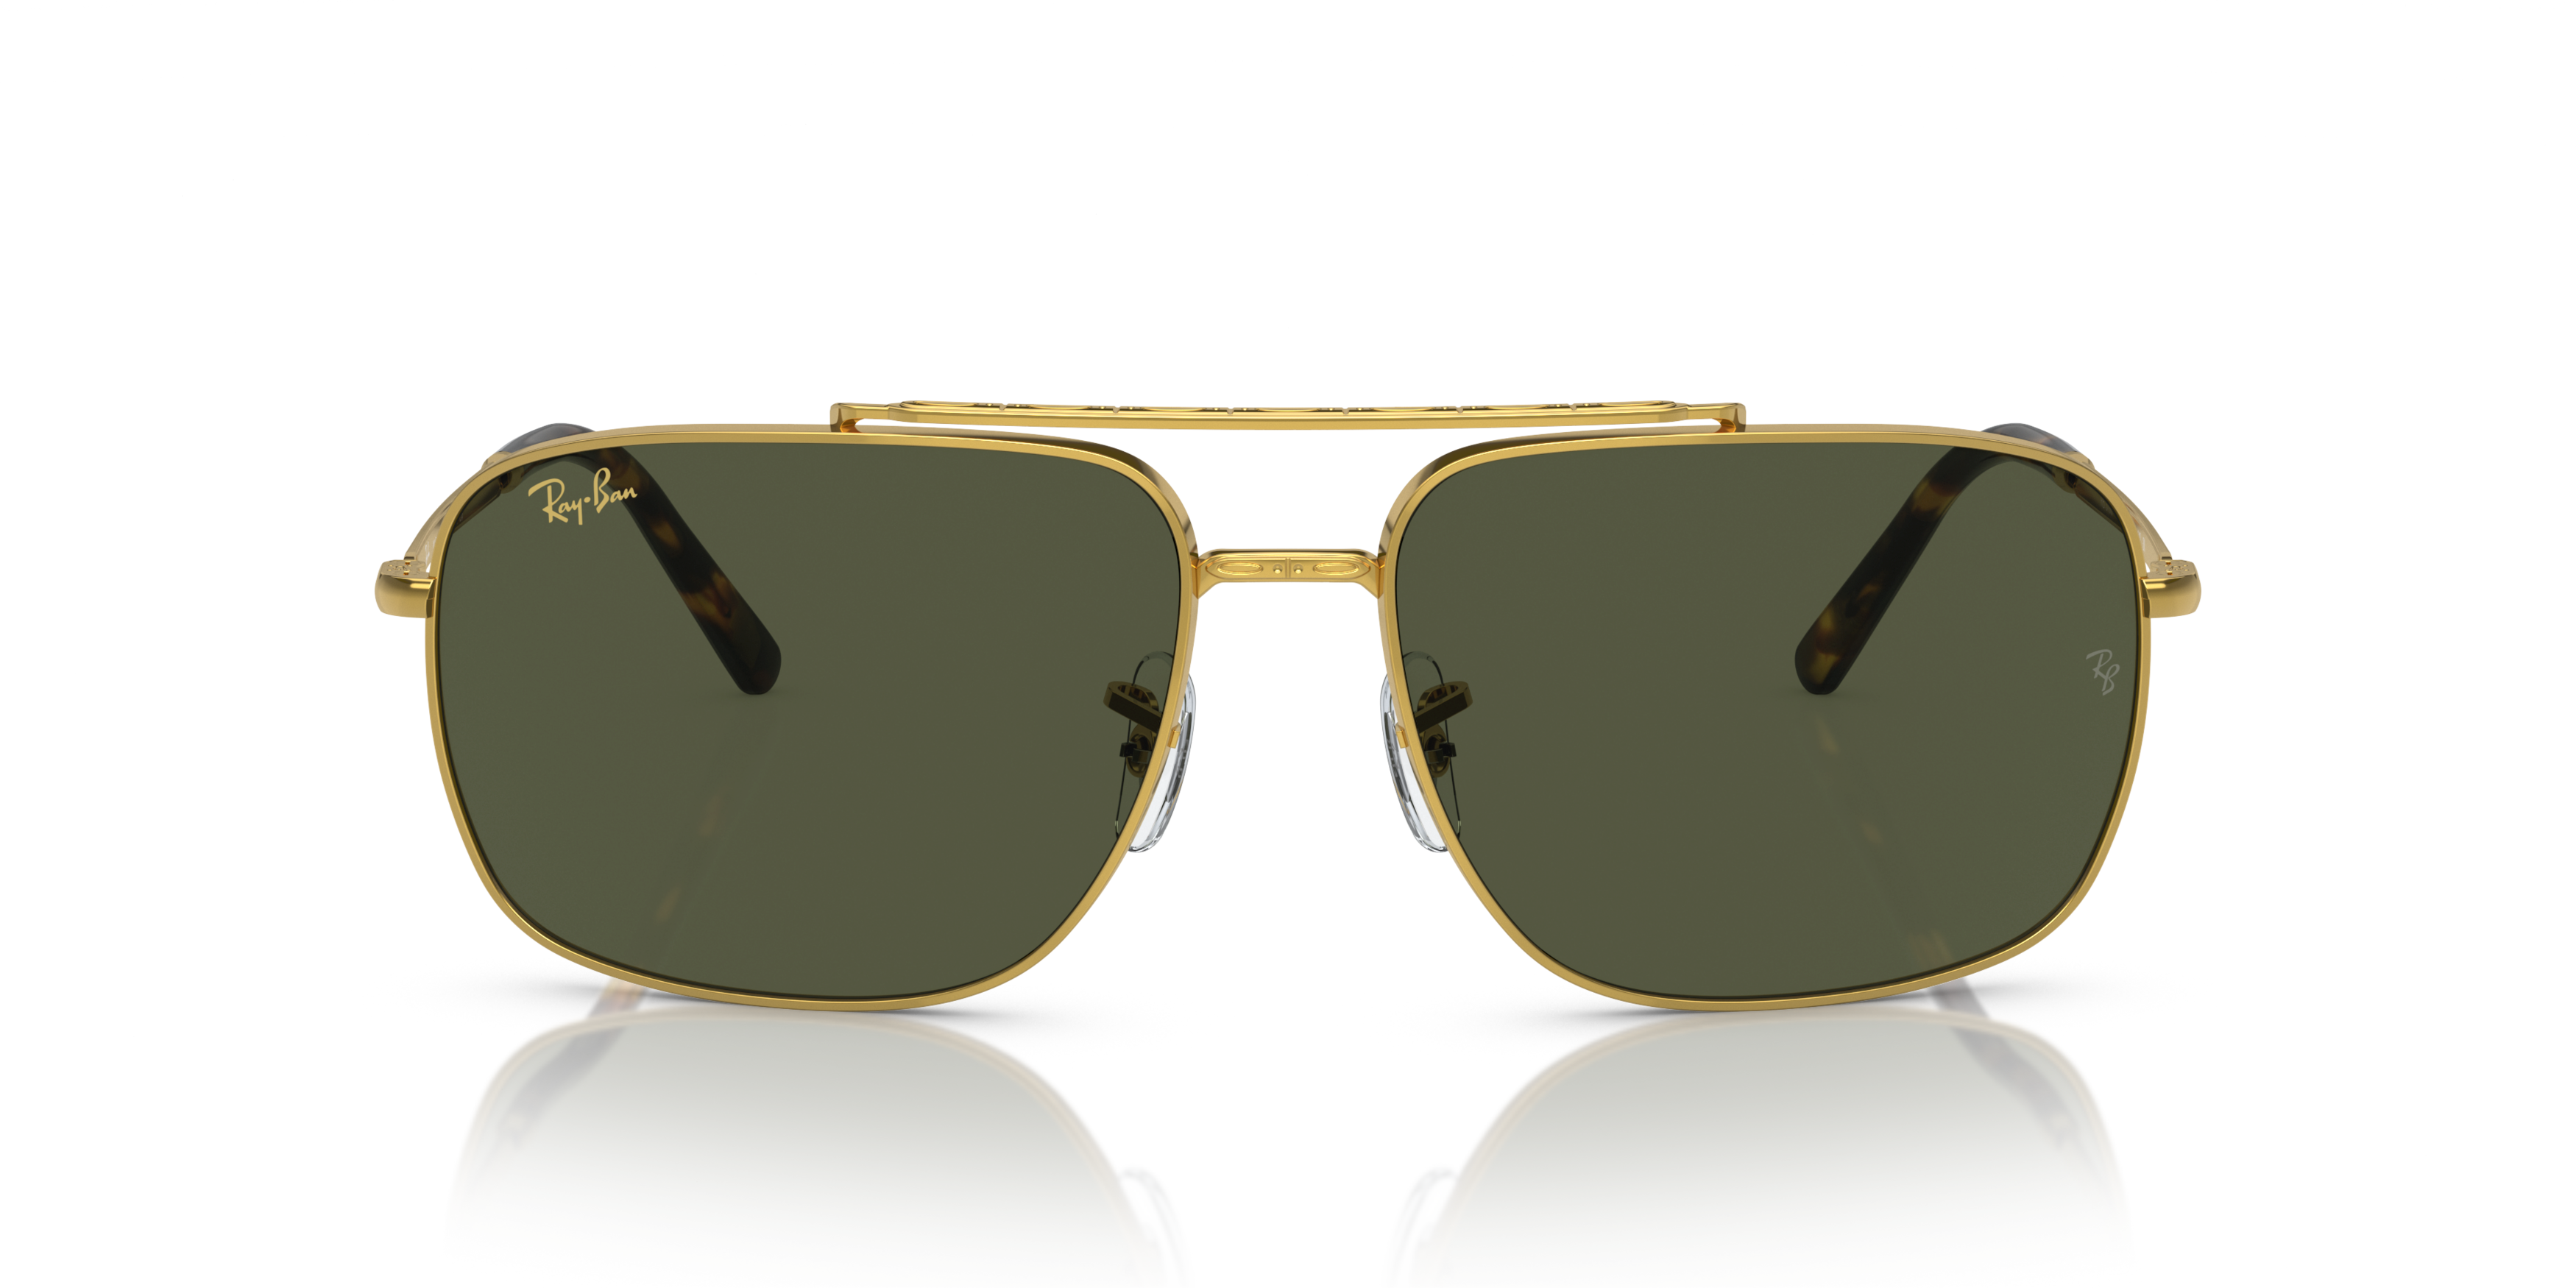 [products.image.front] RAY-BAN RB3796 919631